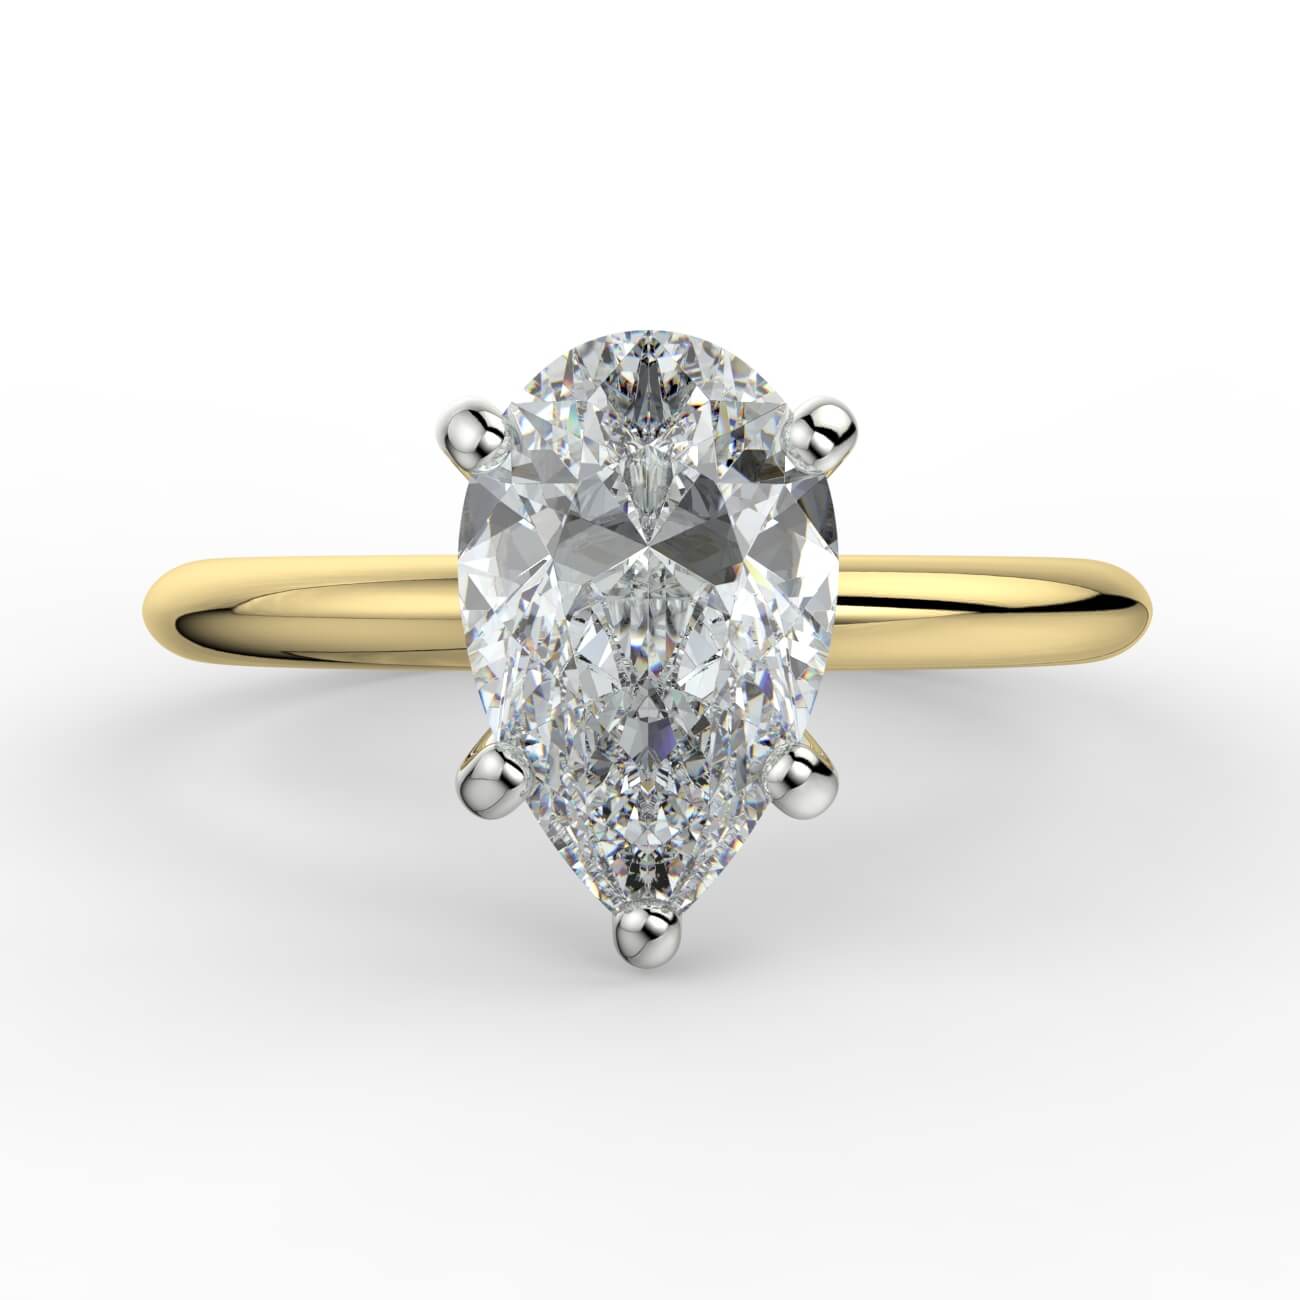 Solitaire pear shape diamond engagement ring in yellow and white gold – Australian Diamond Network